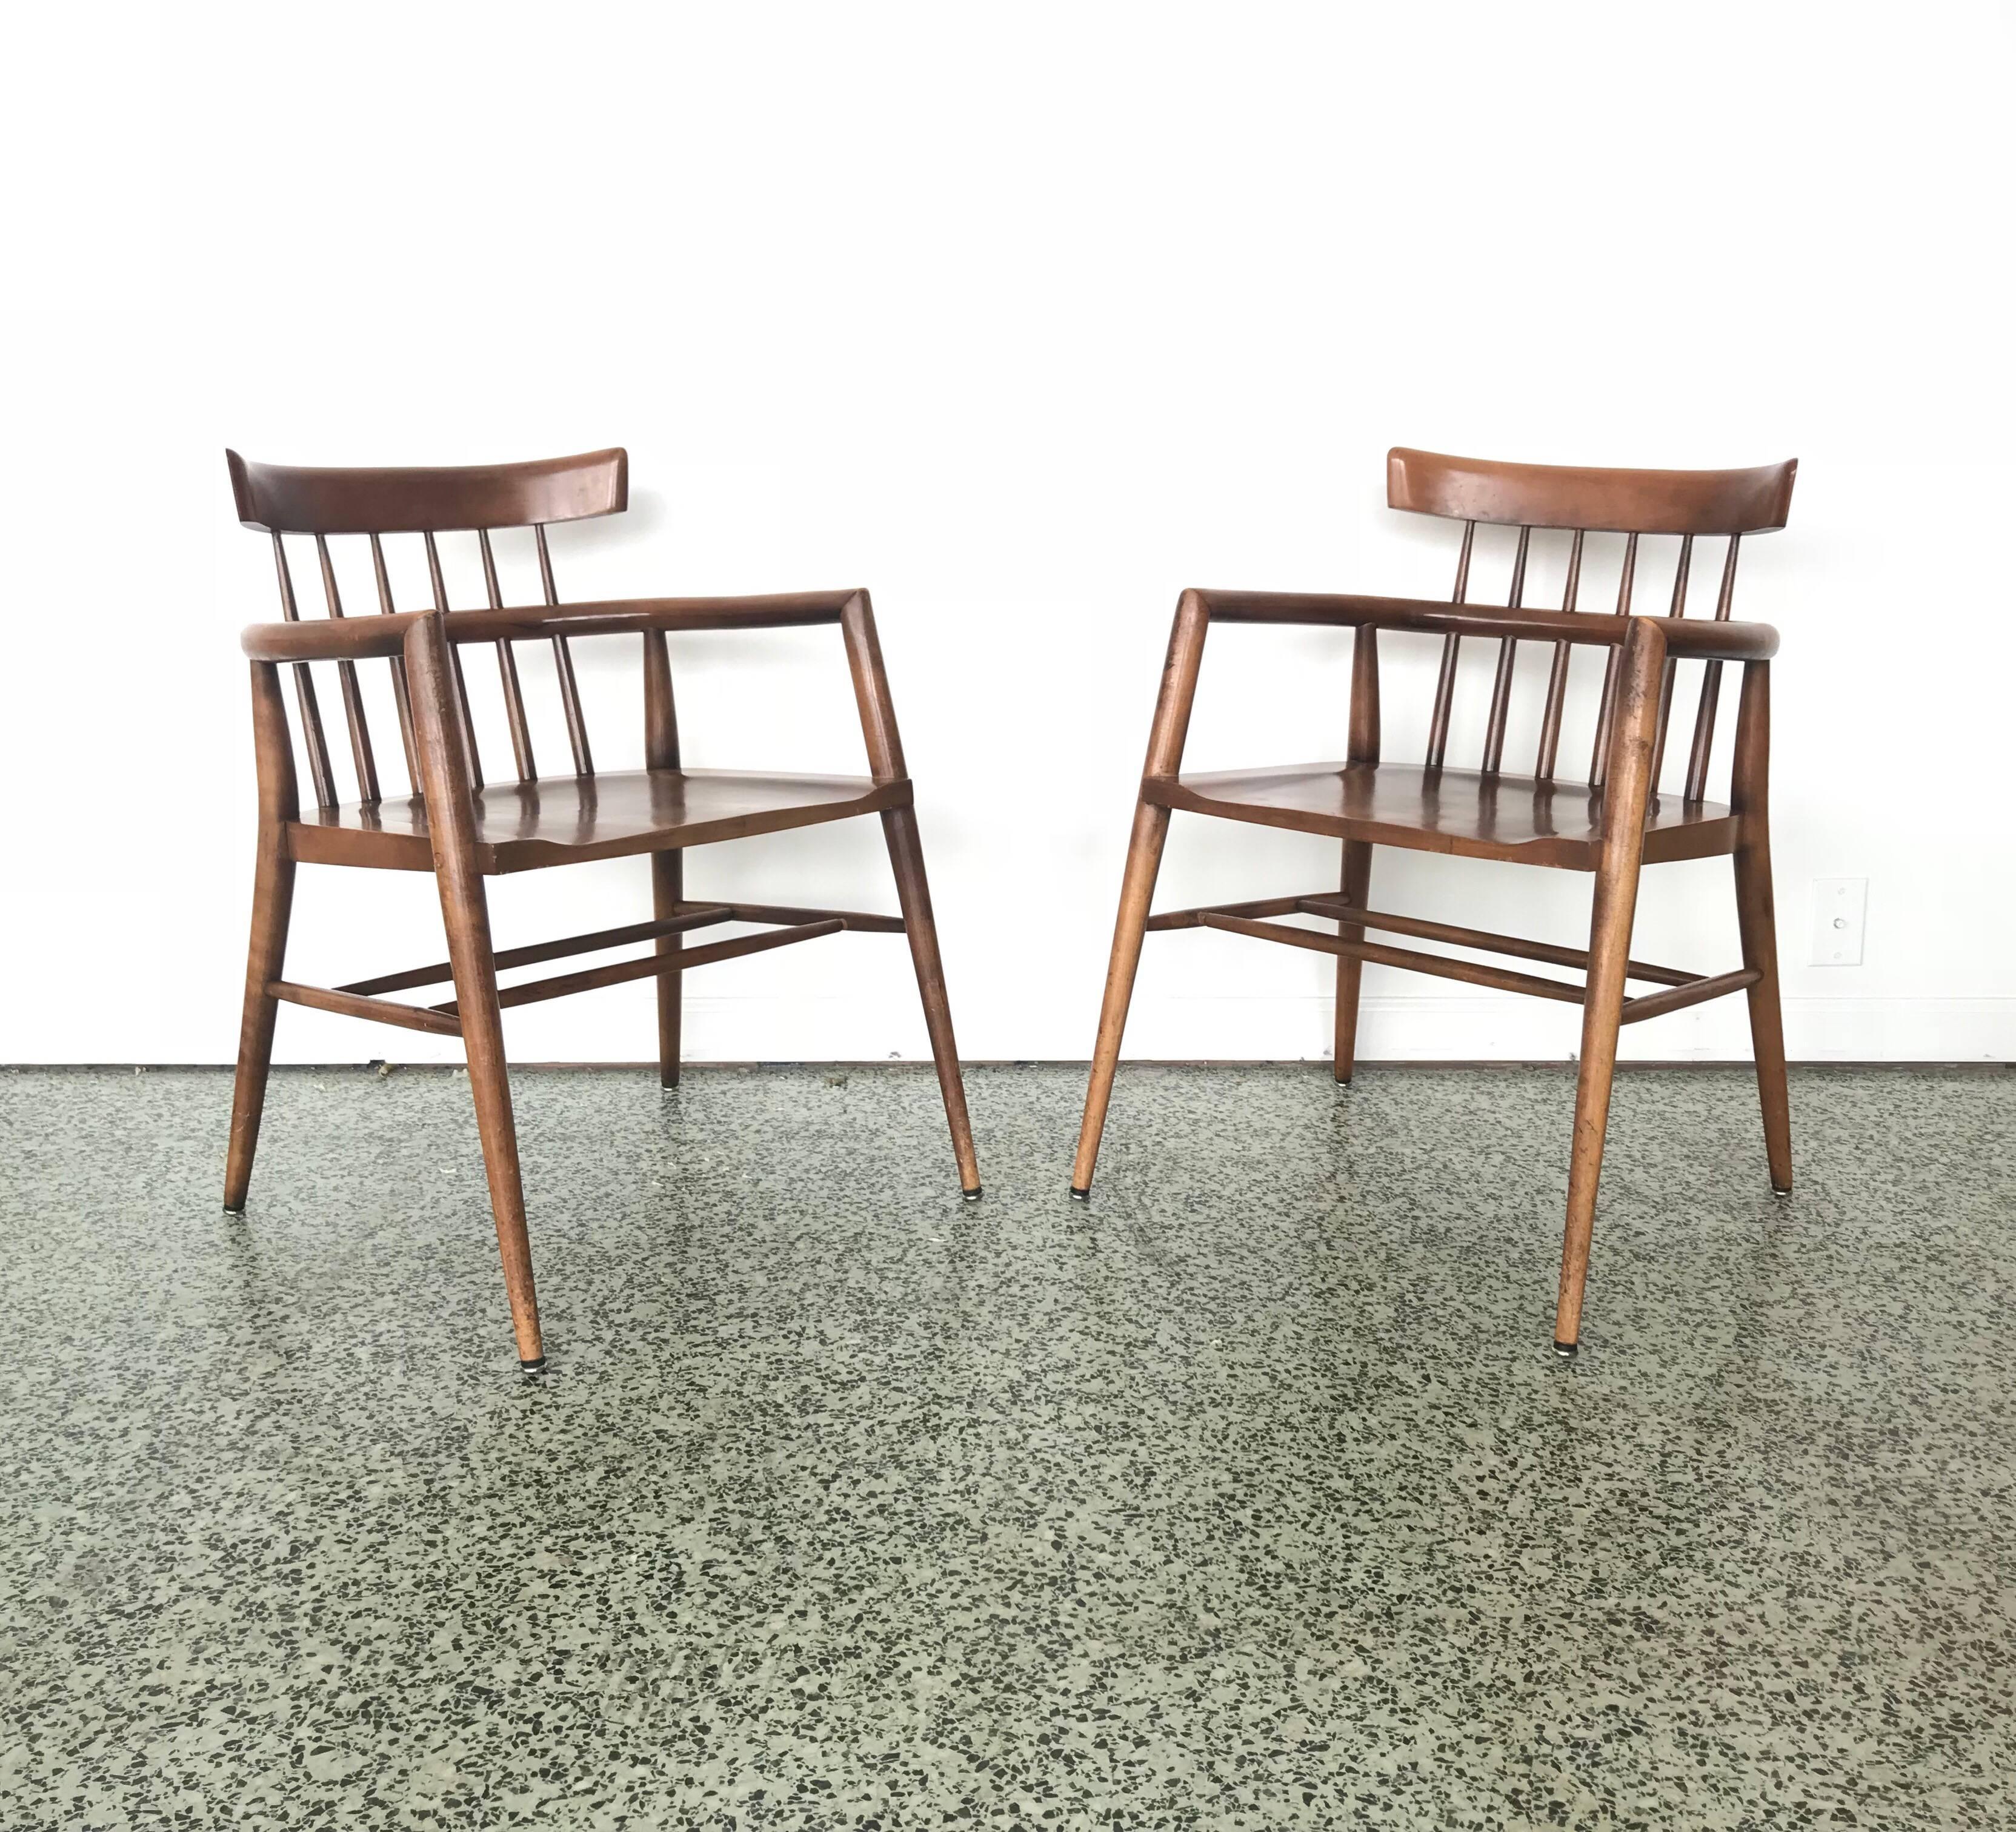 20th Century Pair of Paul McCobb Armchairs for Winchendon